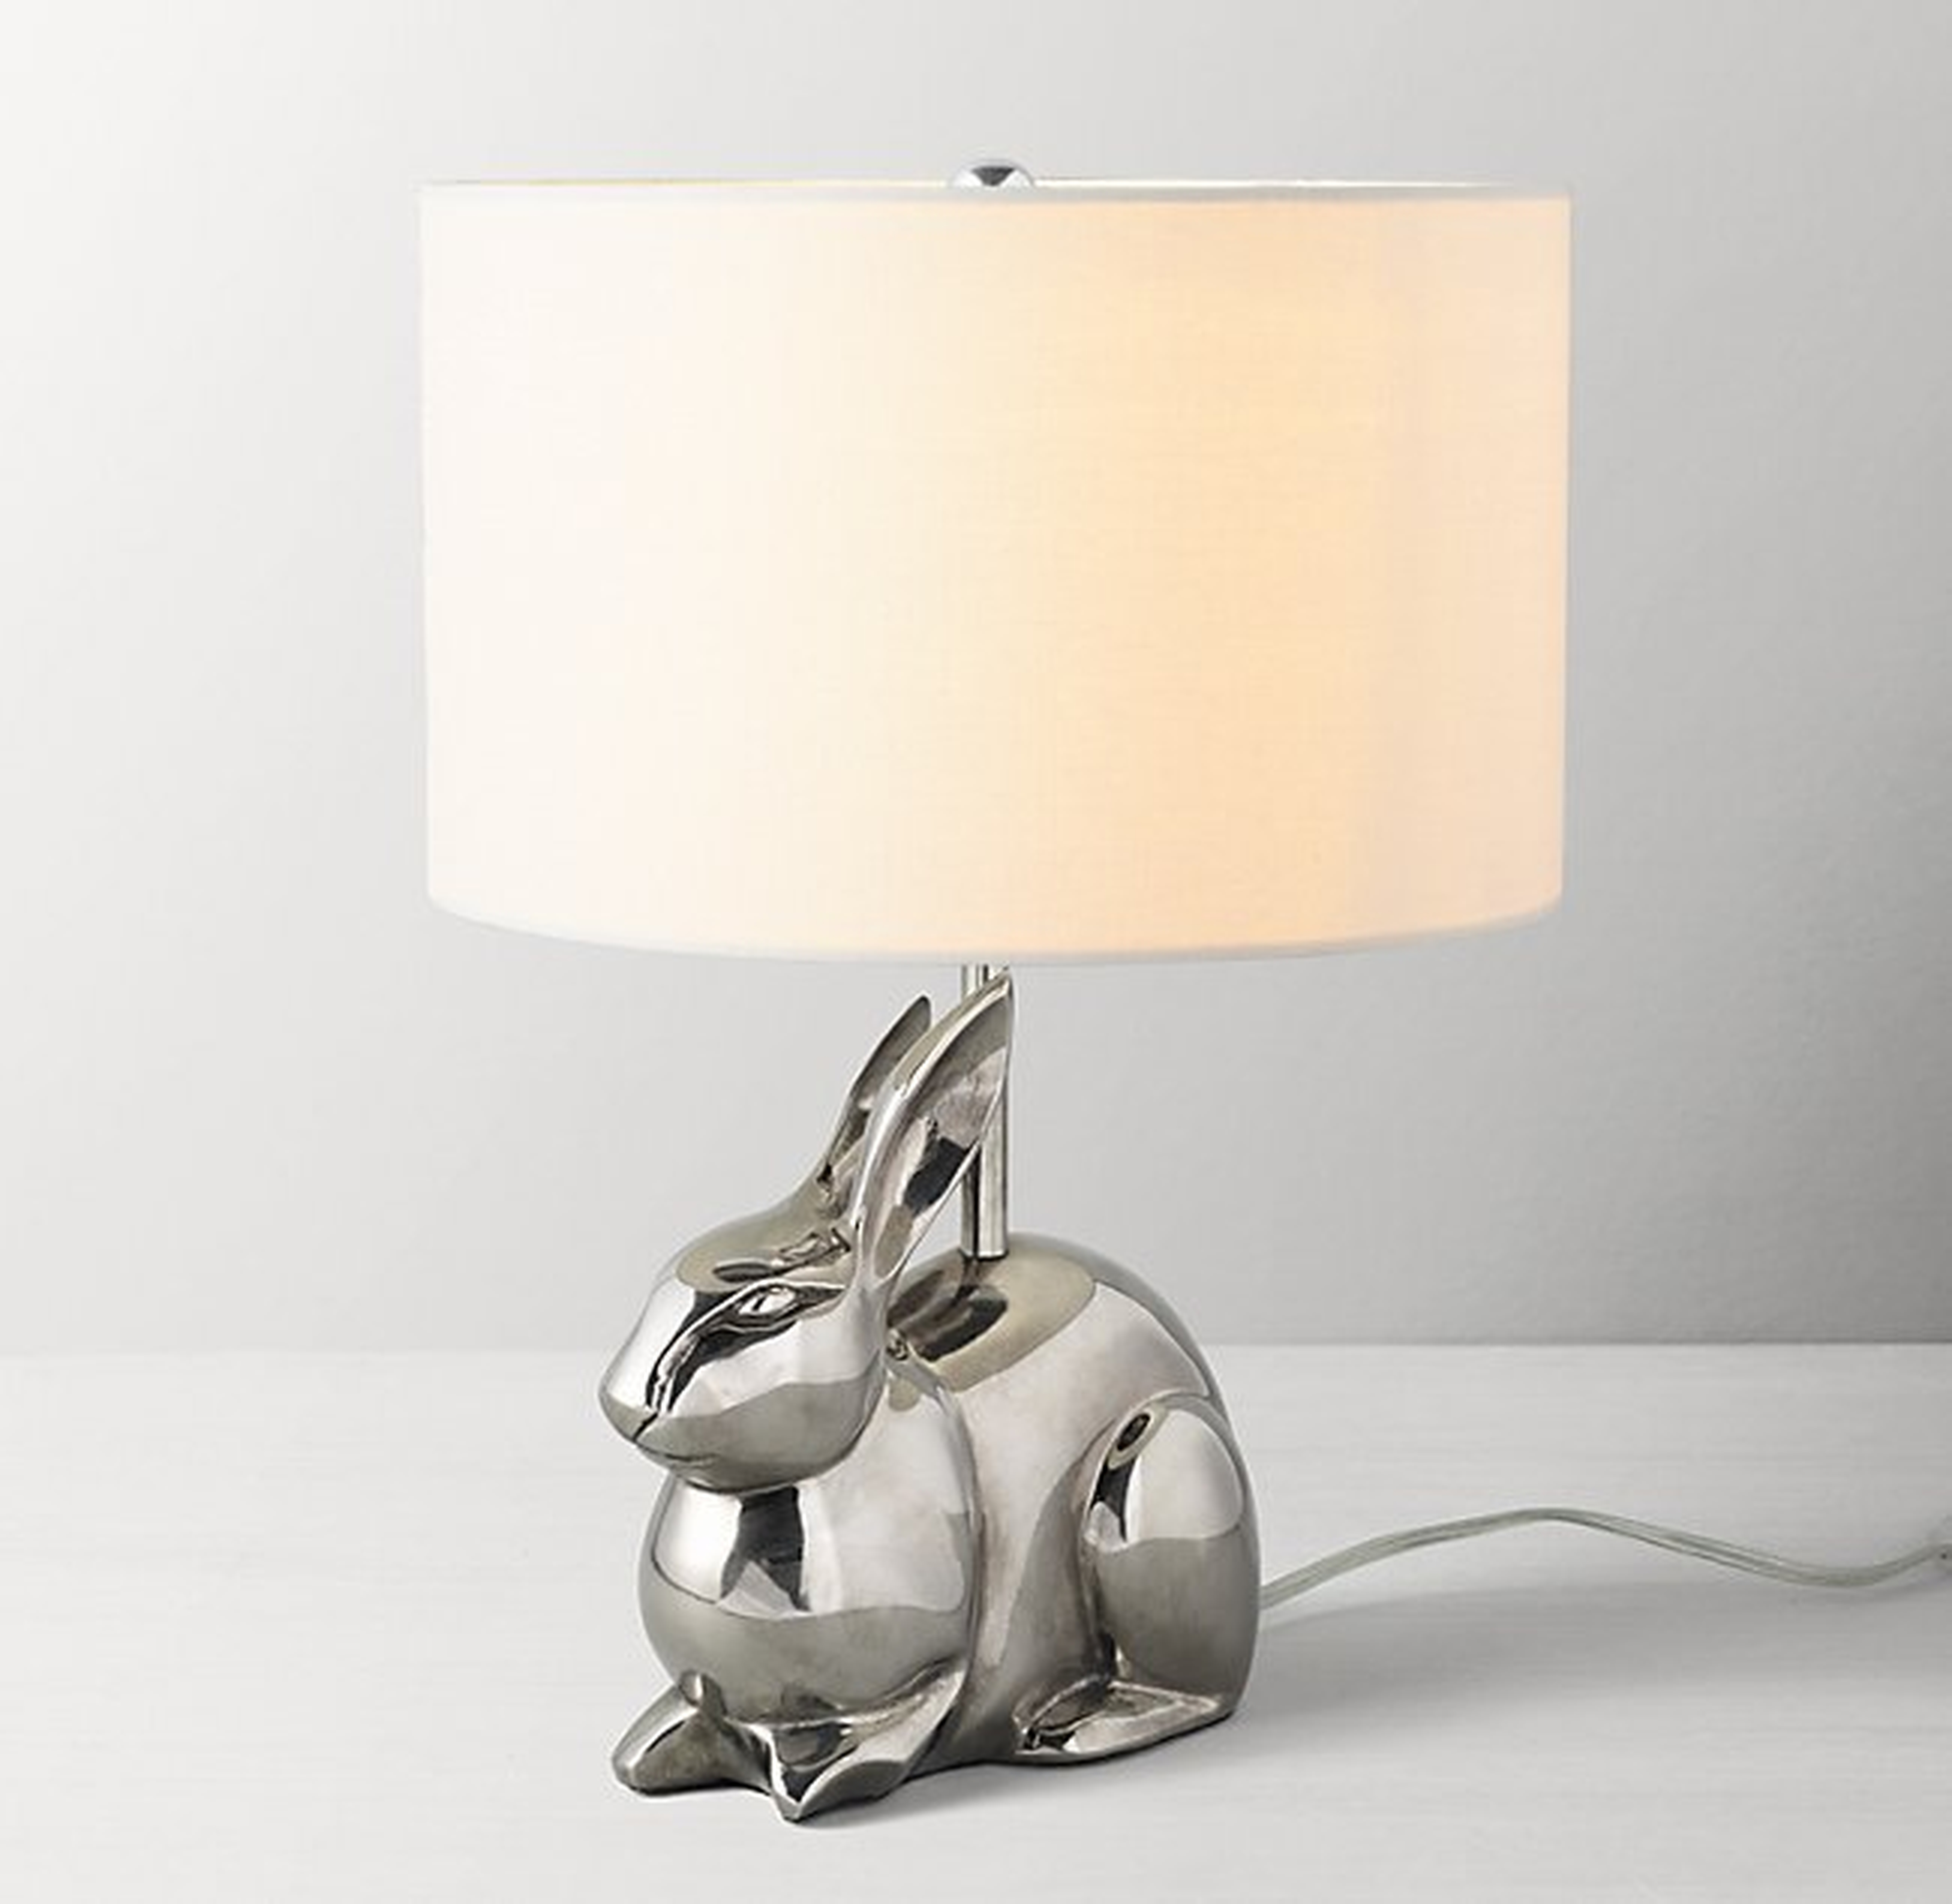 CAST METAL TABLE LAMP WITH SHADE - BUNNY - RH Baby & Child